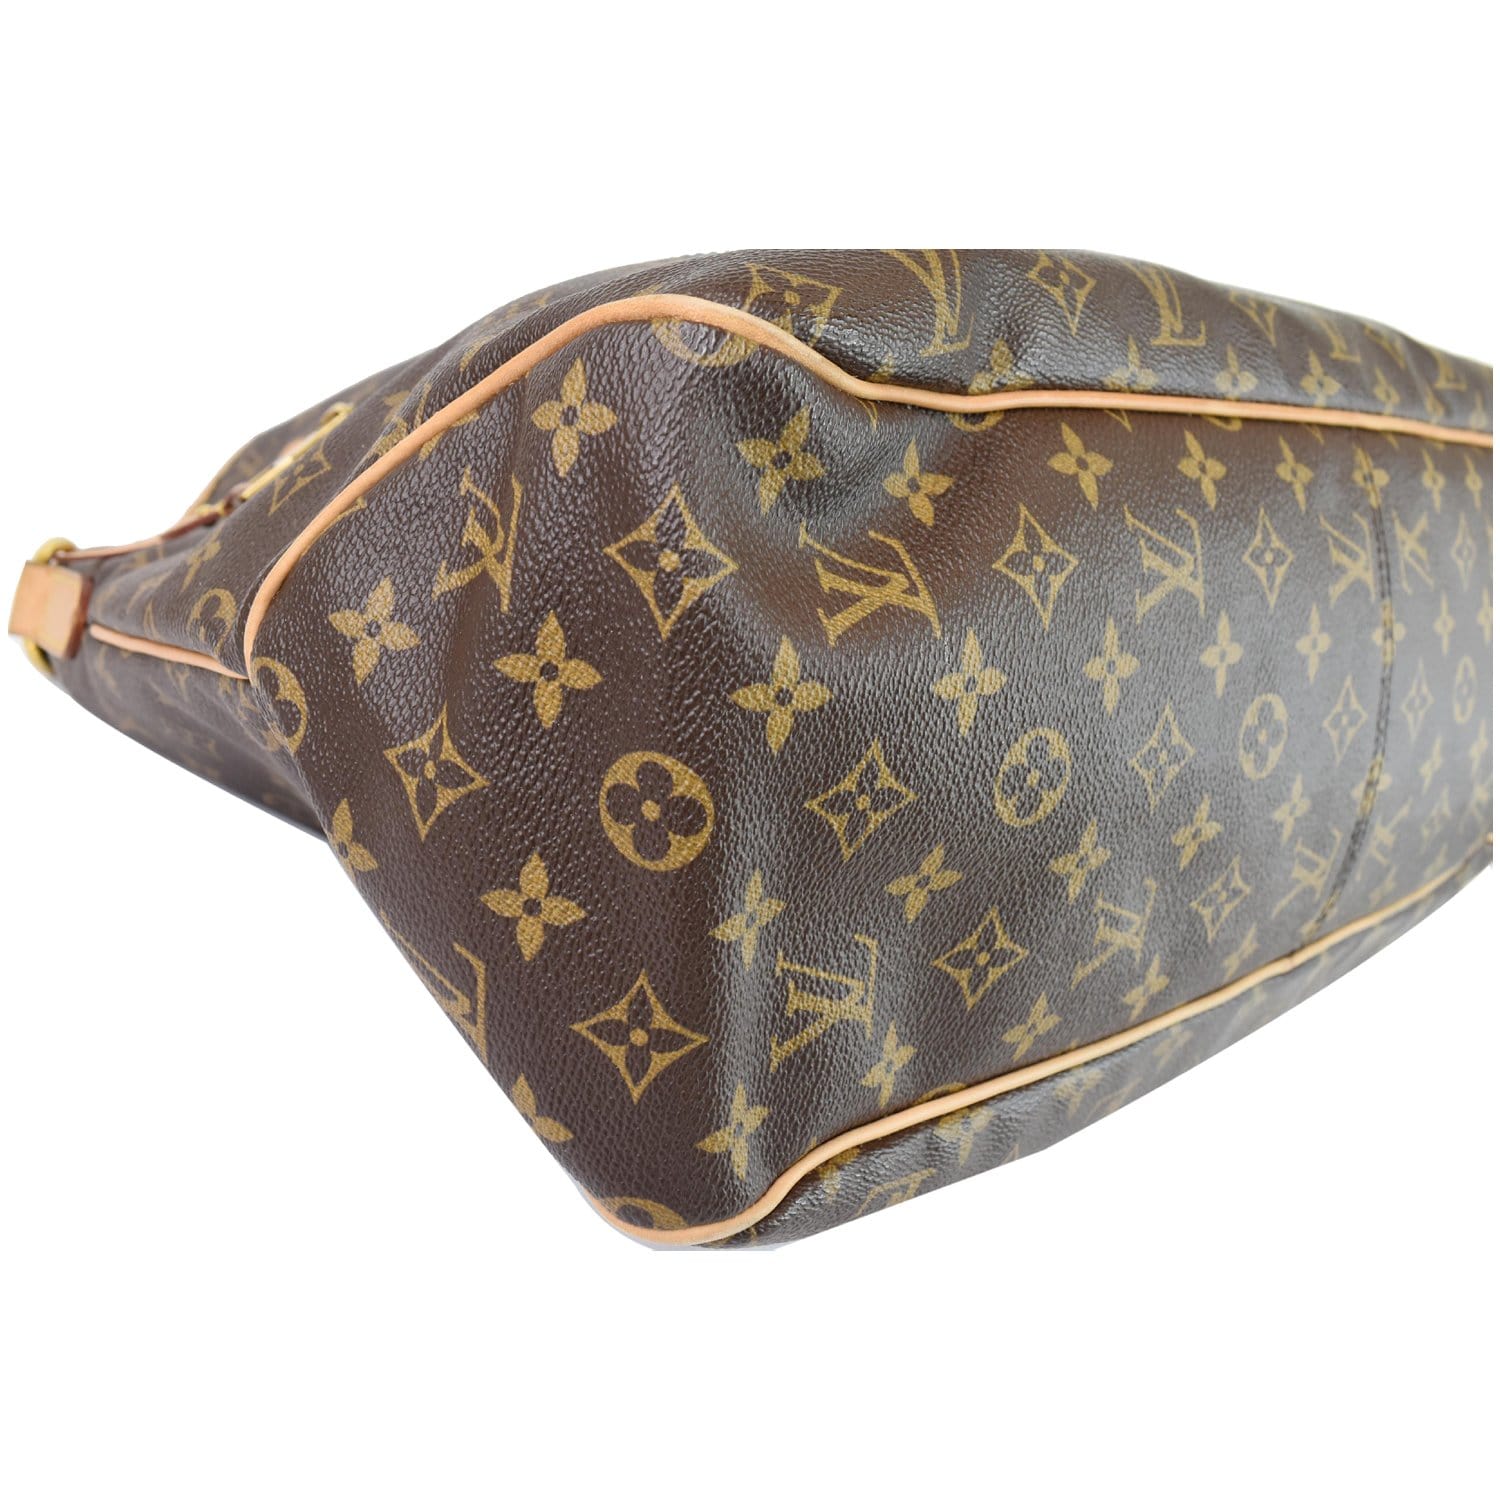 Affordable lv sling bag for laddies For Sale, Cross-body Bags